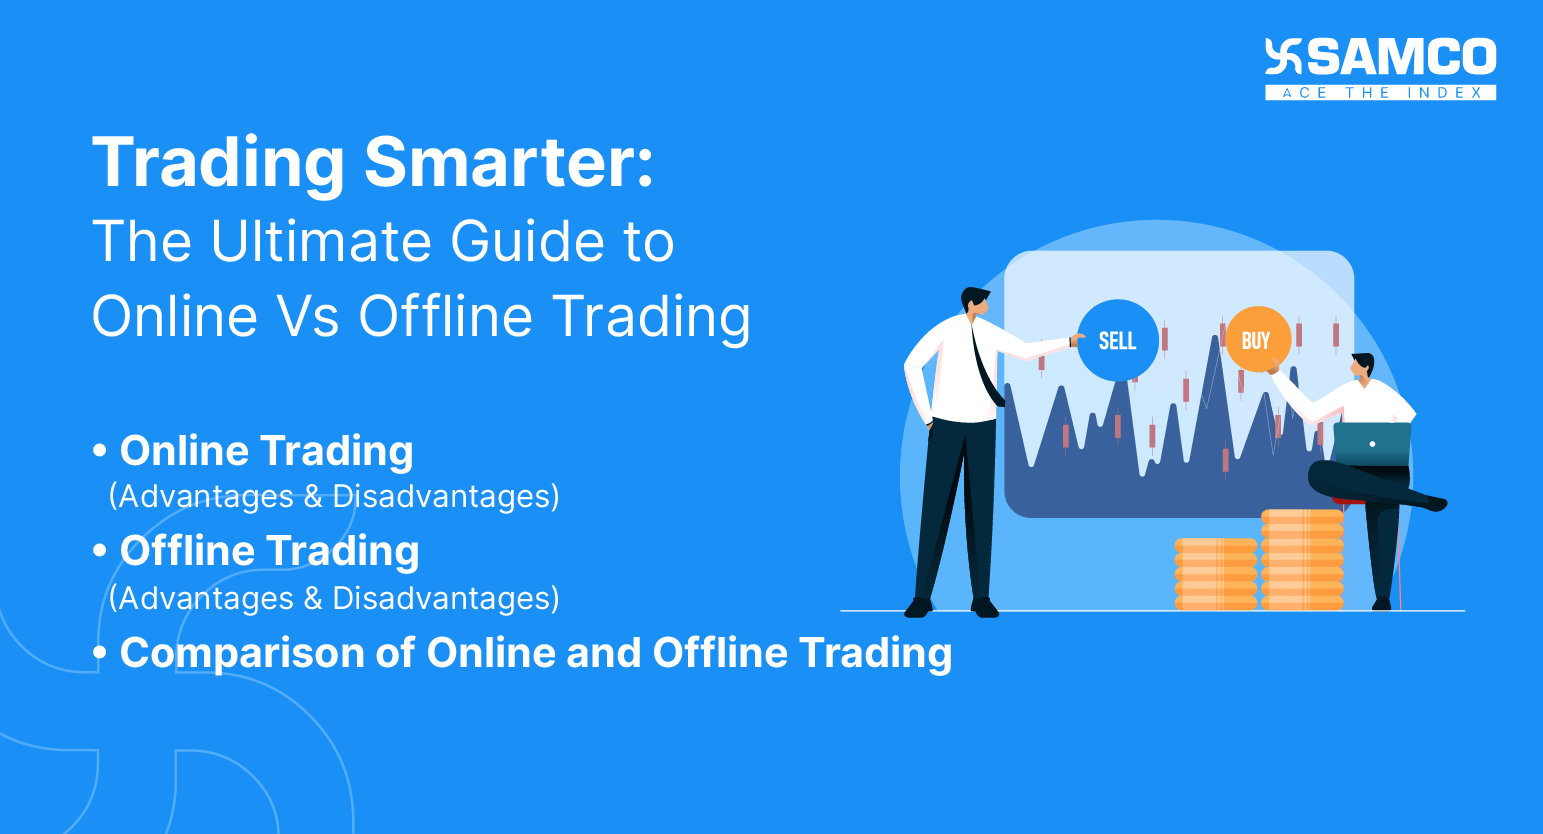 Trading Smarter: The Ultimate Guide to Online vs Offline Trading